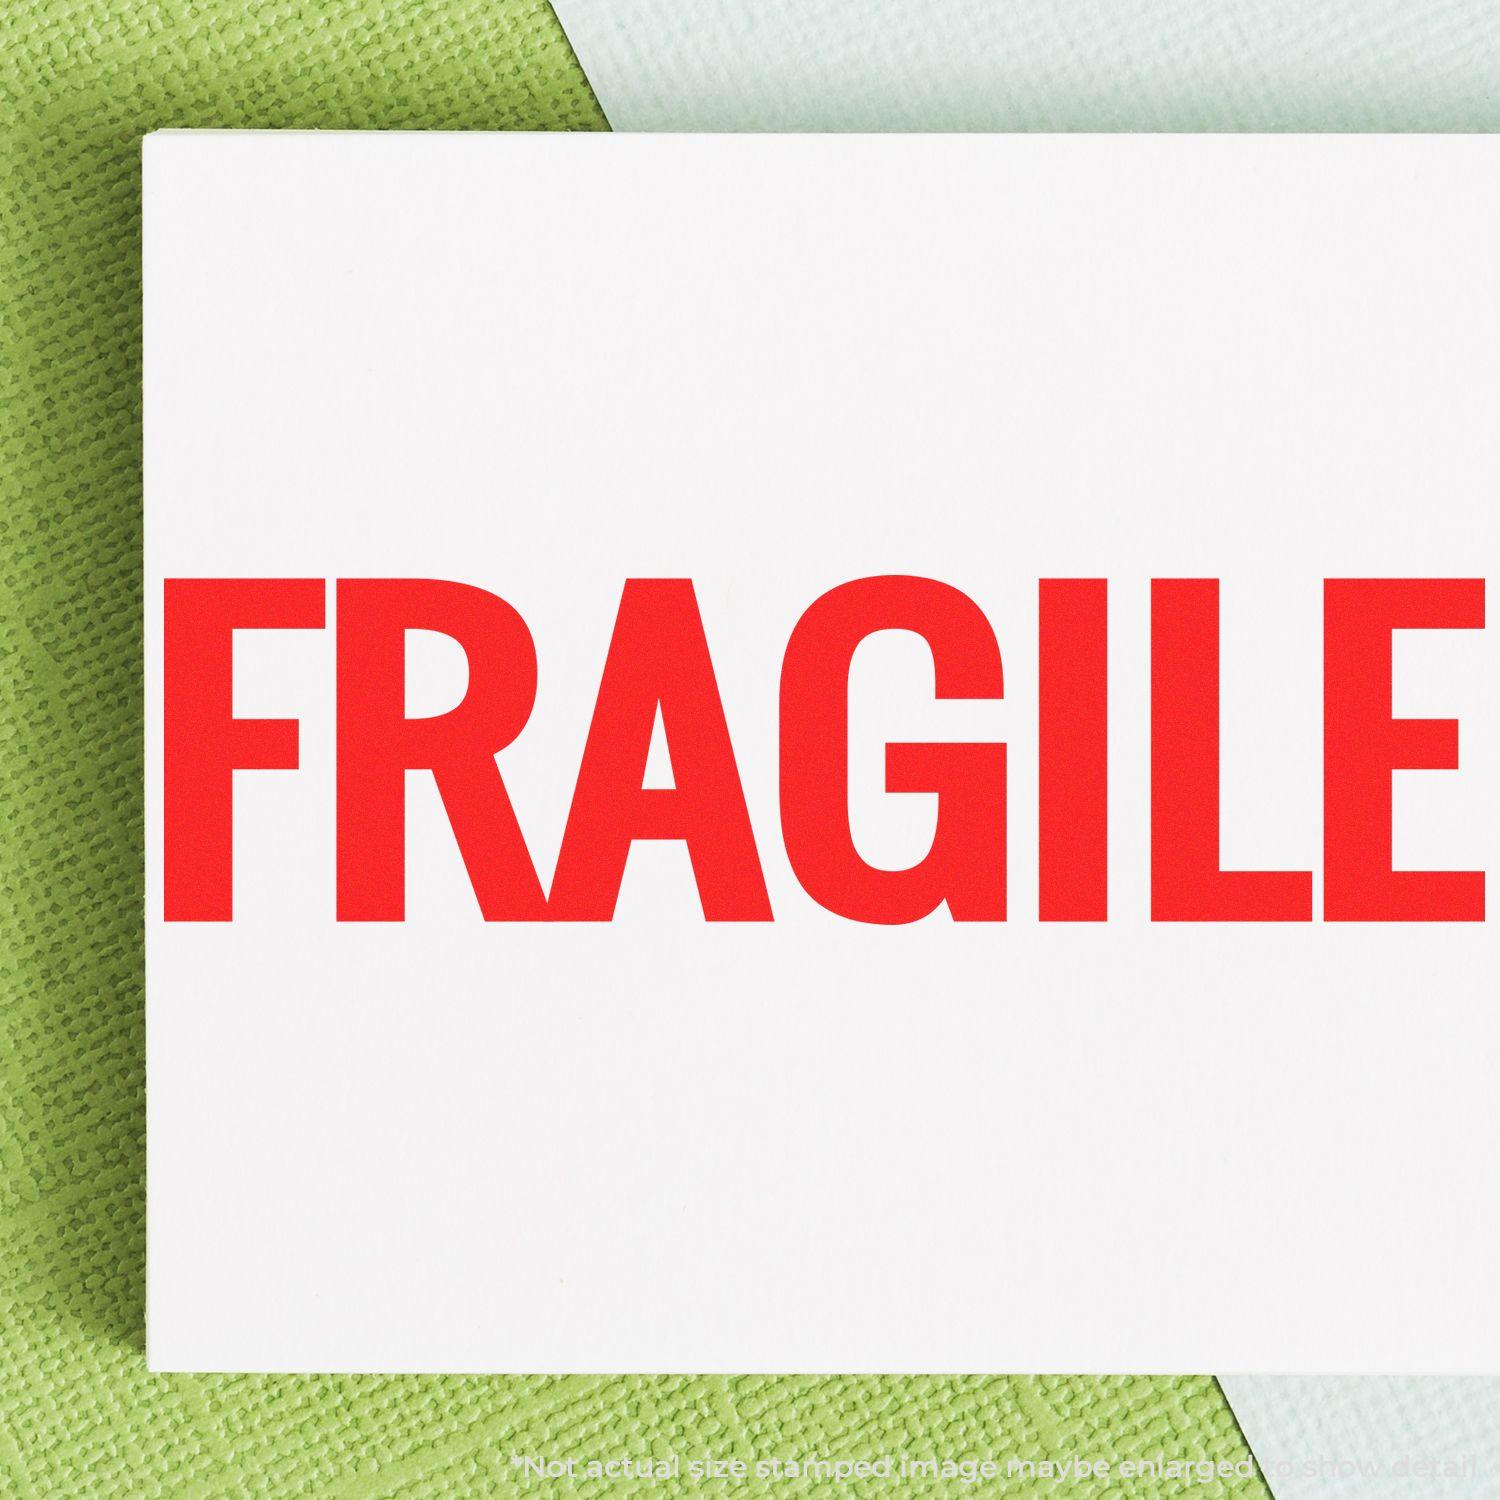 A stock office pre-inked stamp with a stamped image showing how the text "FRAGILE" in bold font is displayed after stamping.